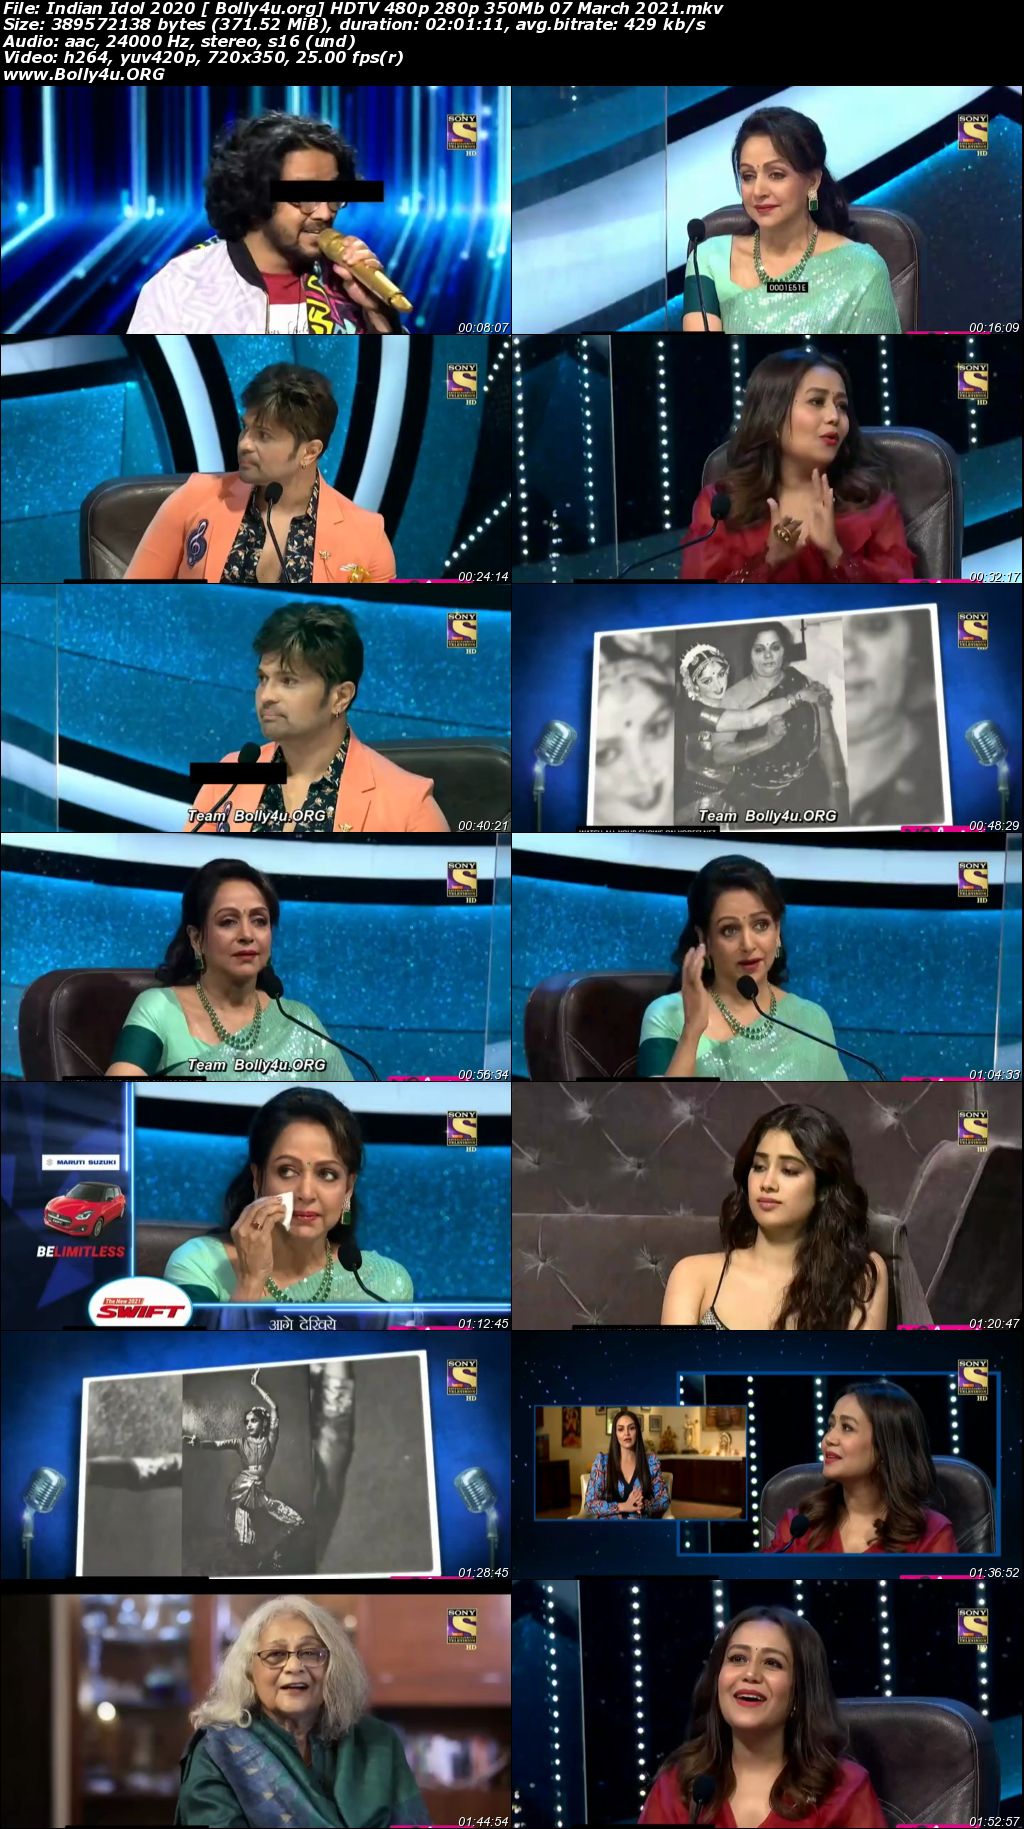 Indian Idol 2020 HDTV 480p 280p 350Mb 07 March 2021 Download